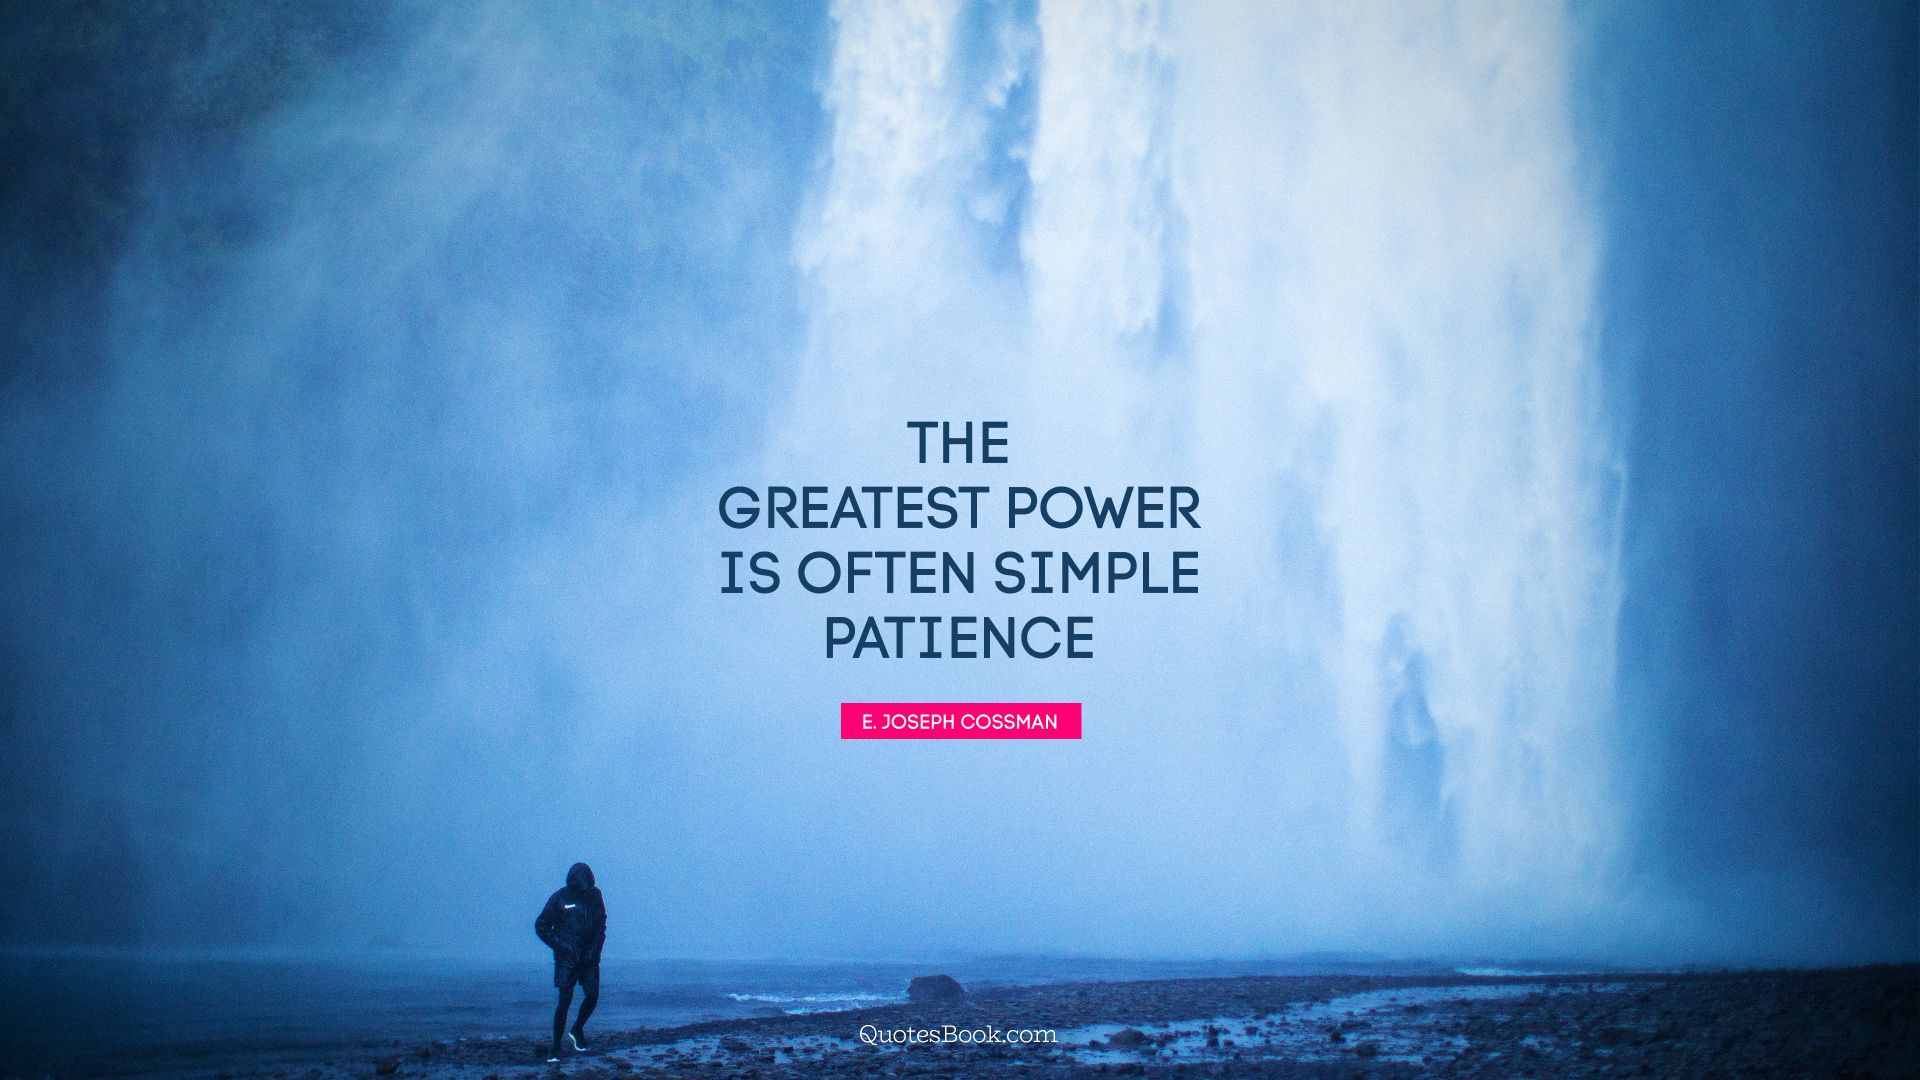 The greatest power is often simple patience. - Quote by E. Joseph Cossman